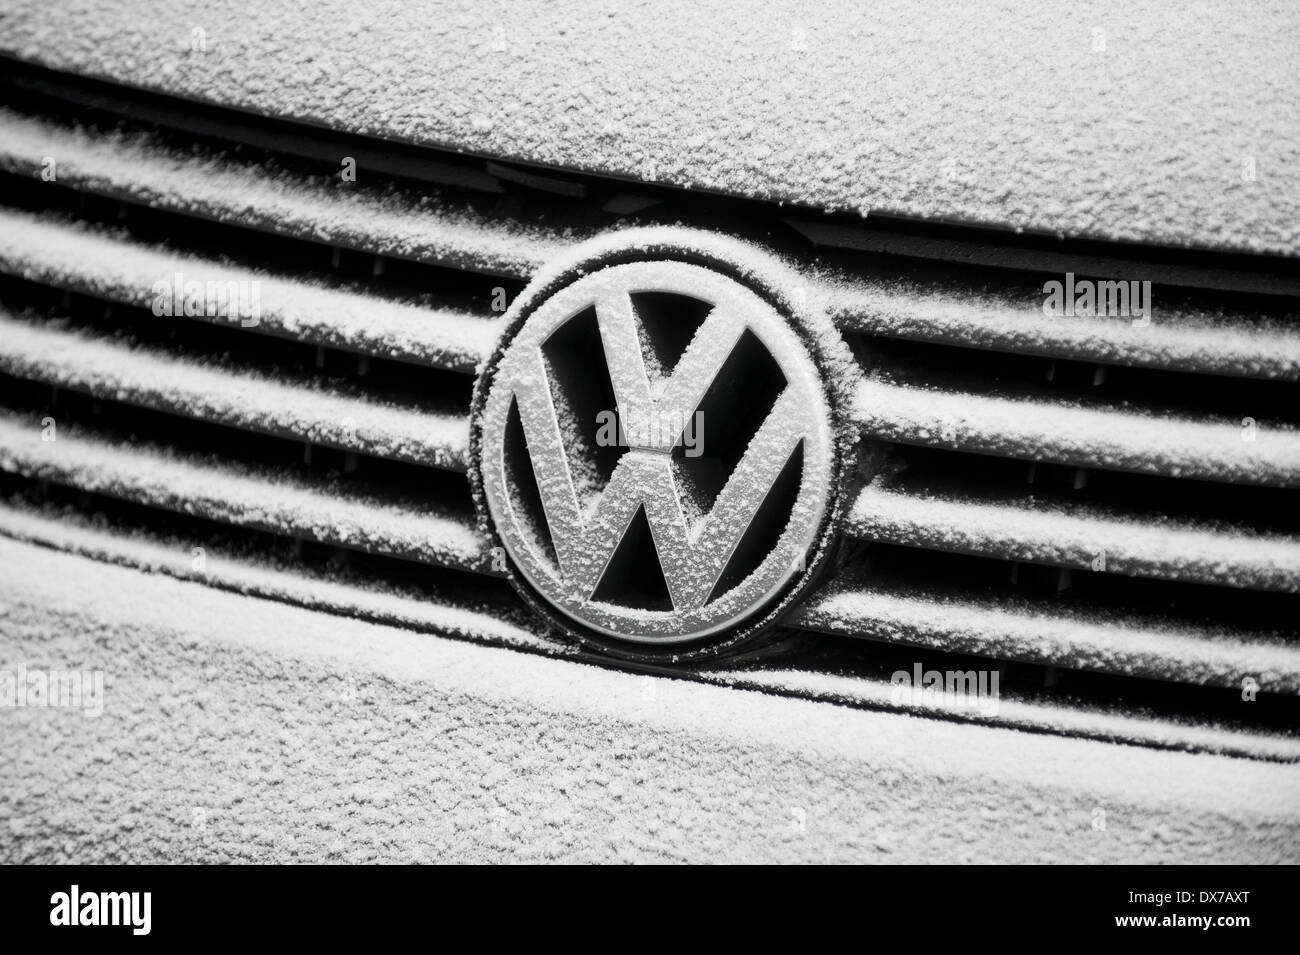 BUCHAREST - FEBRUARY 5: Volkswagen logo is covered with thin layer of fresh snow on February 5, 2014 in Bucharest. Stock Photo